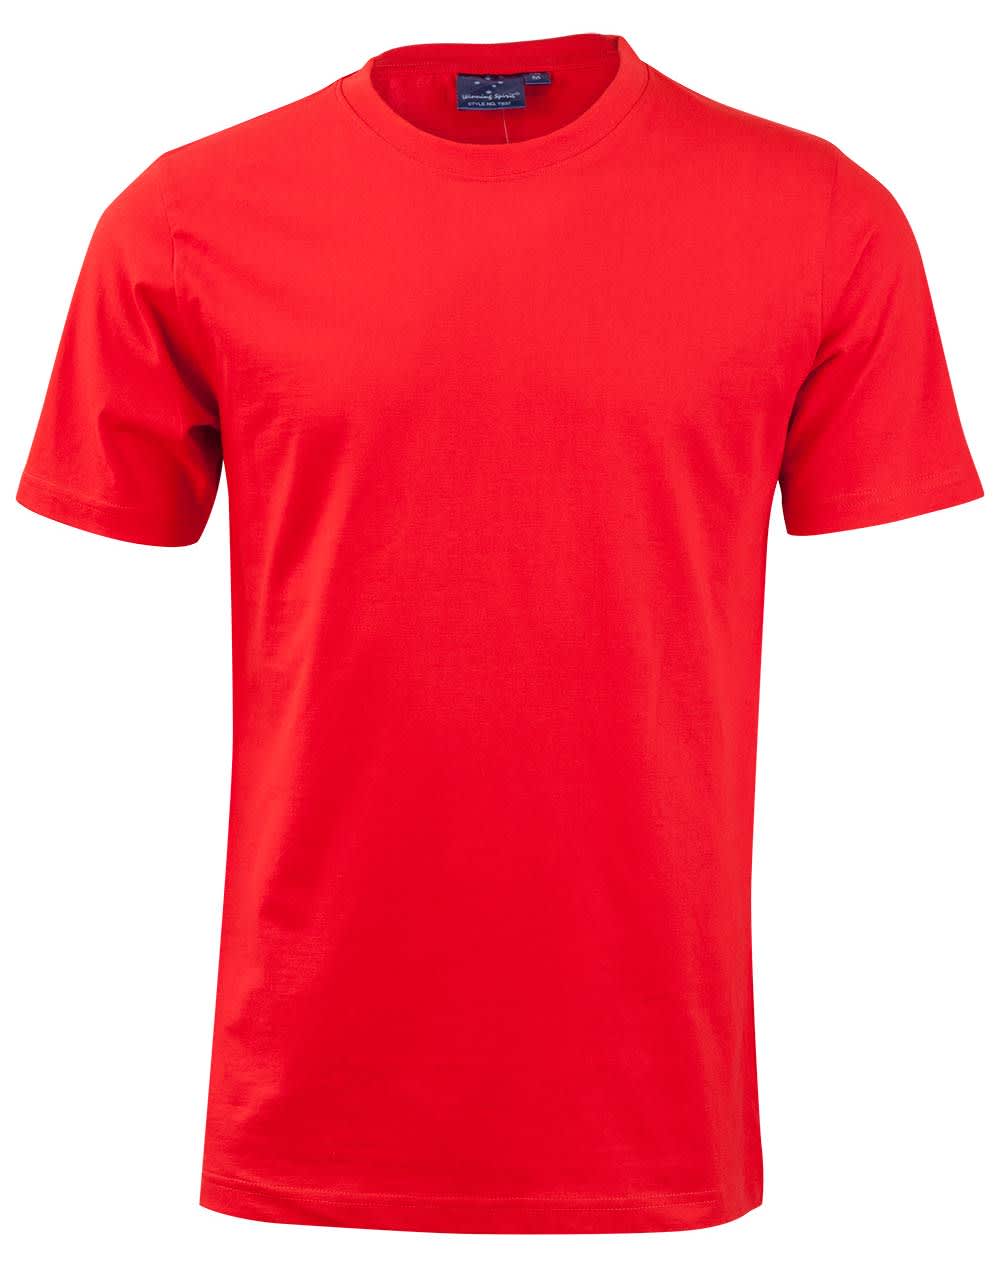 Kids 100% Cotton Semi Fitted Tee Shirt TS37K | Red